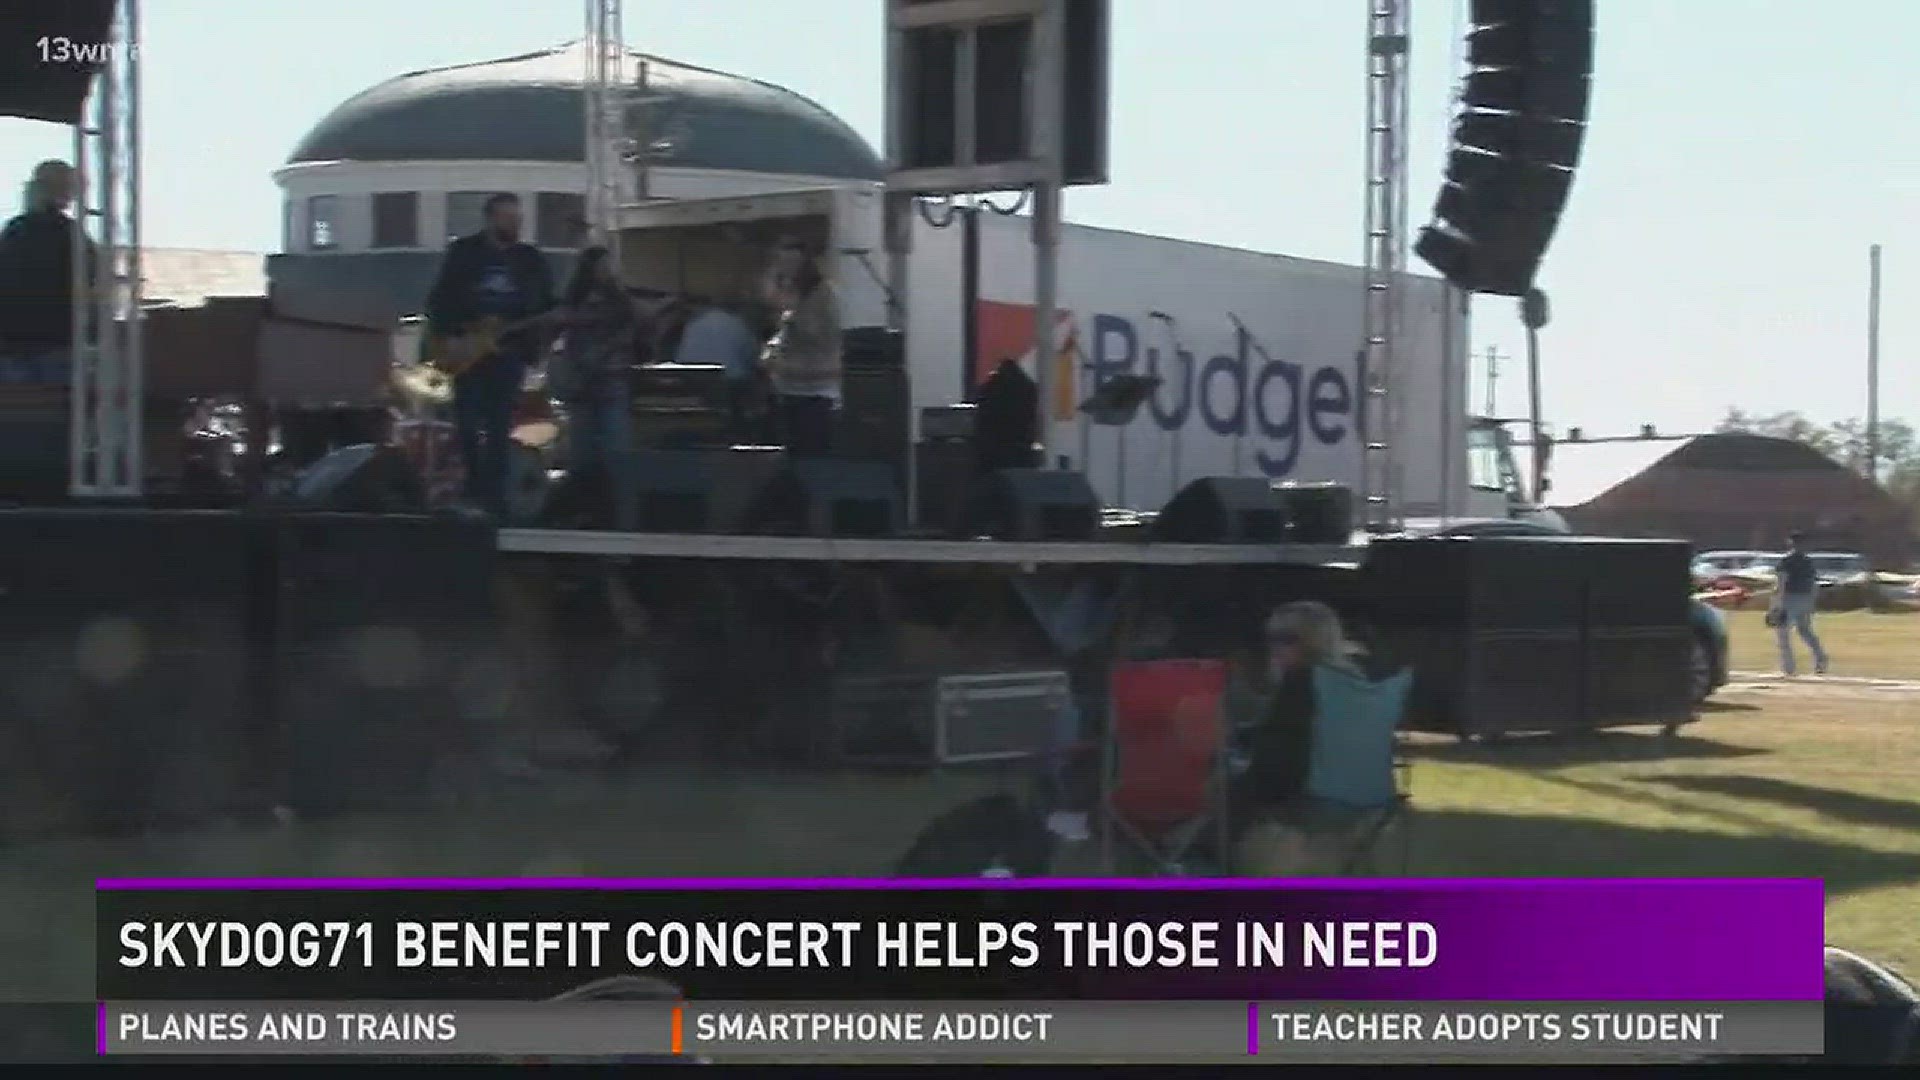 Skydog 71 concert helps those in need